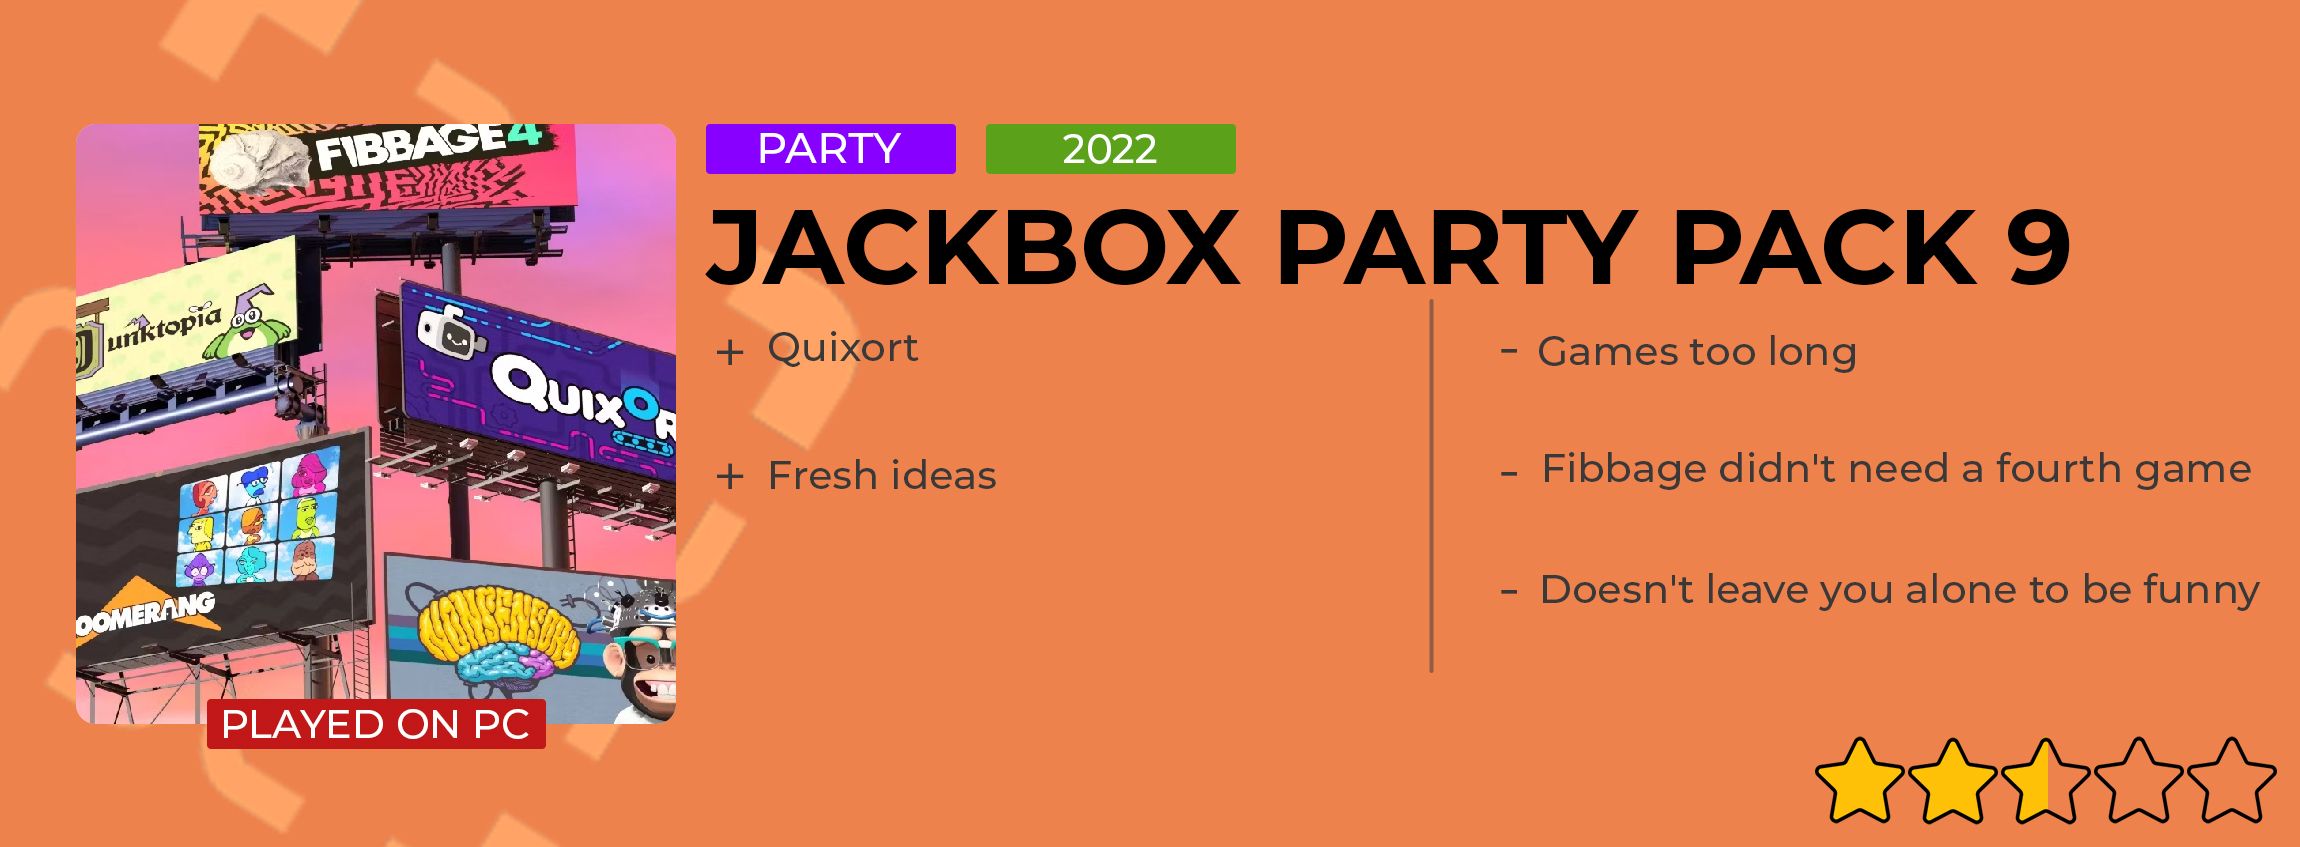 Jackbox Party Pack 9 Review Card